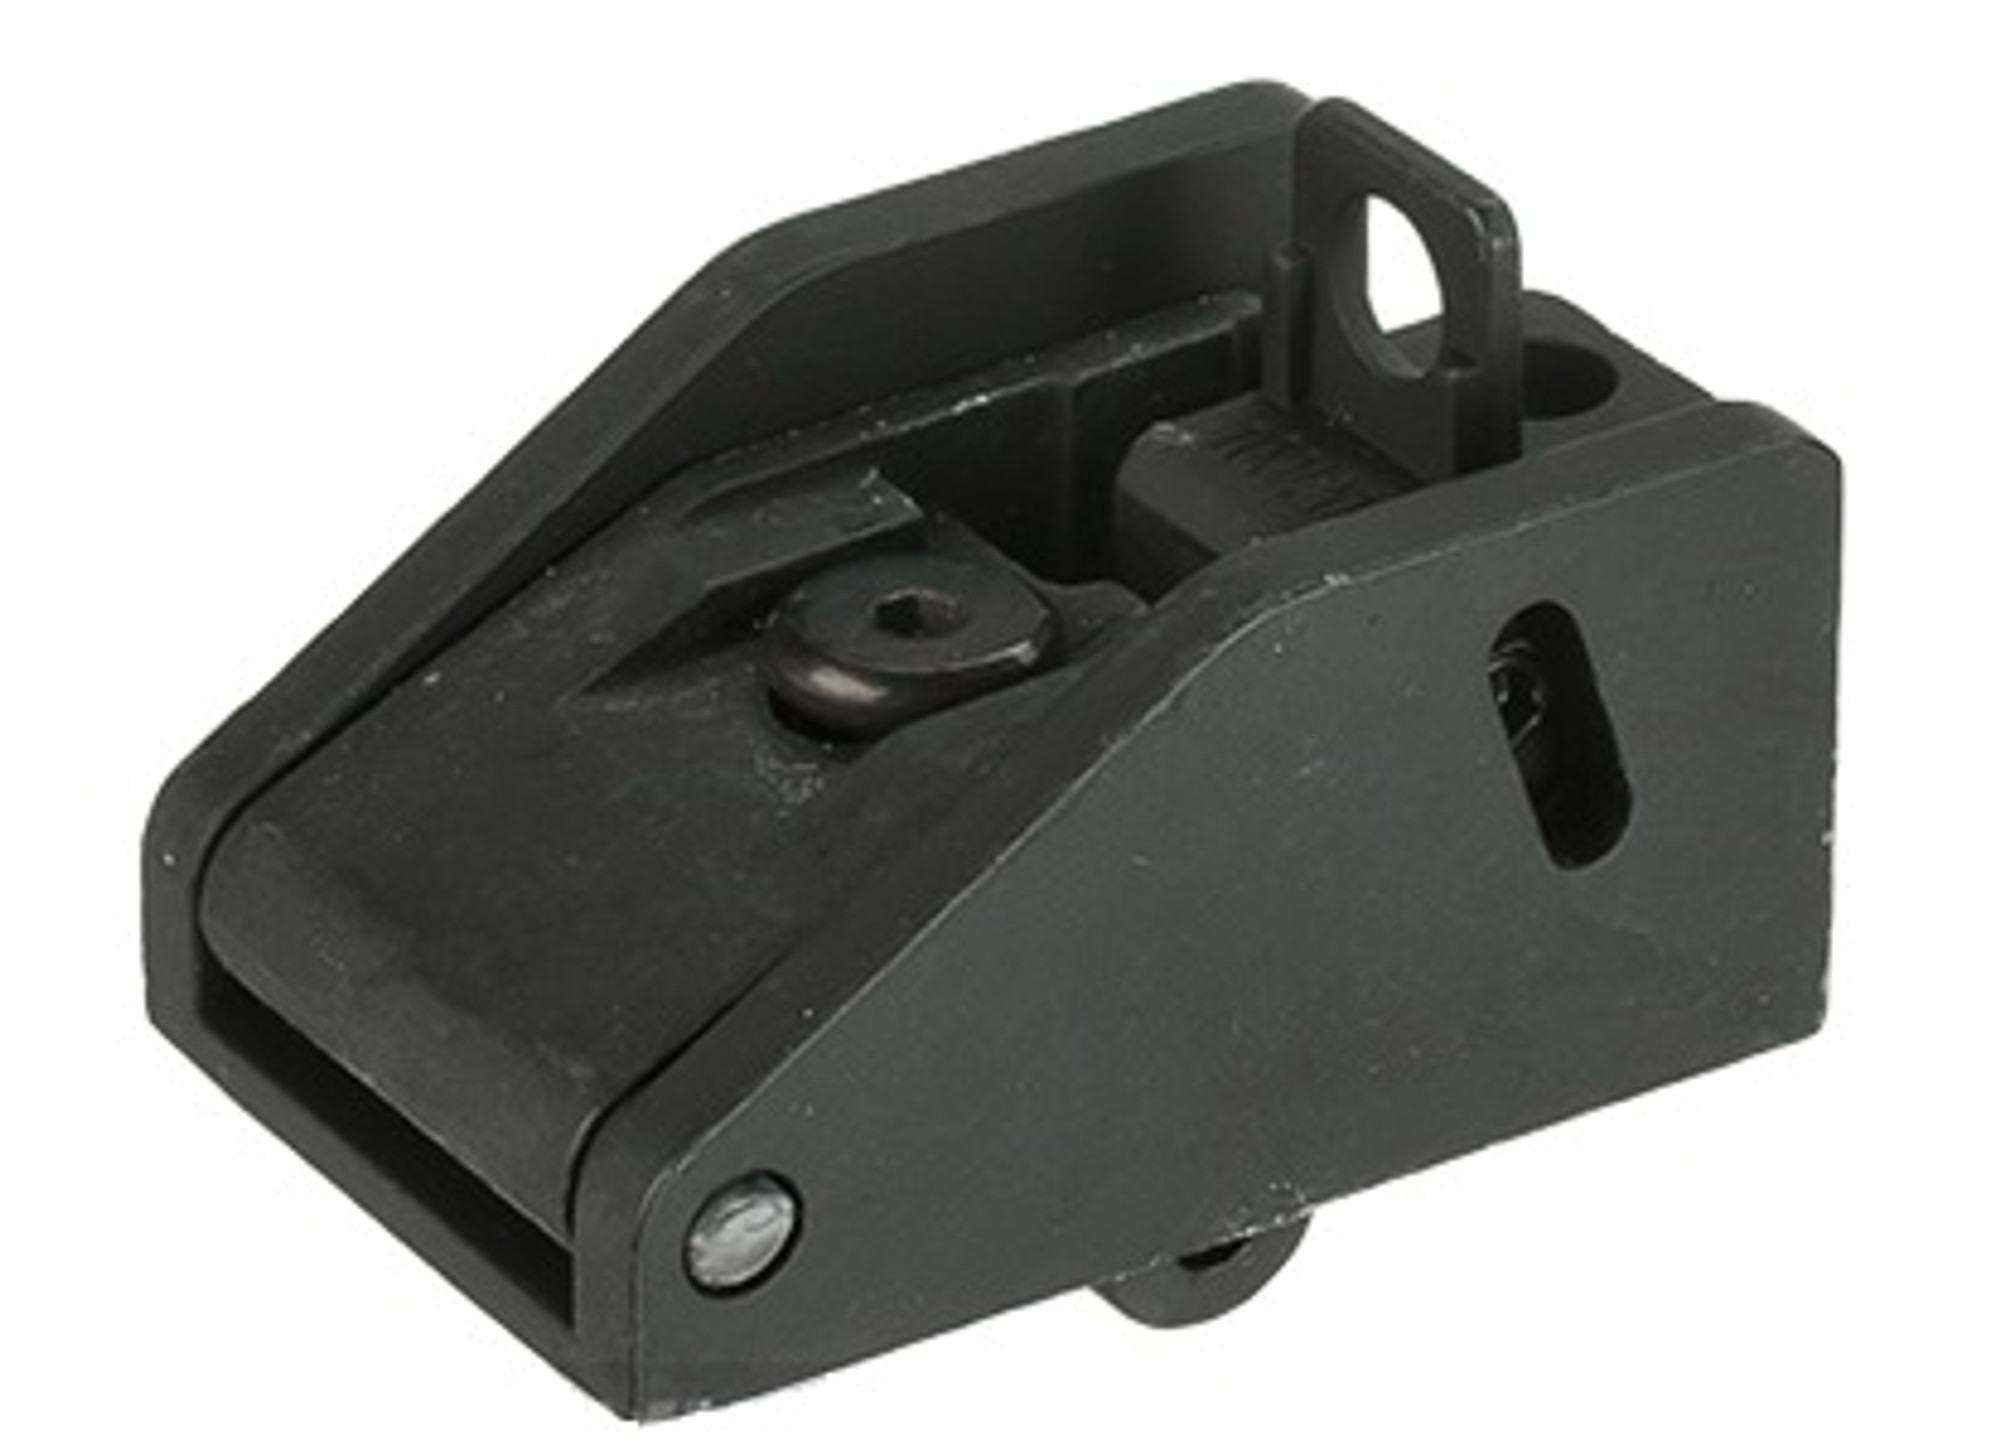 JG OEM Replacement Airsoft Rear Sight - MK36